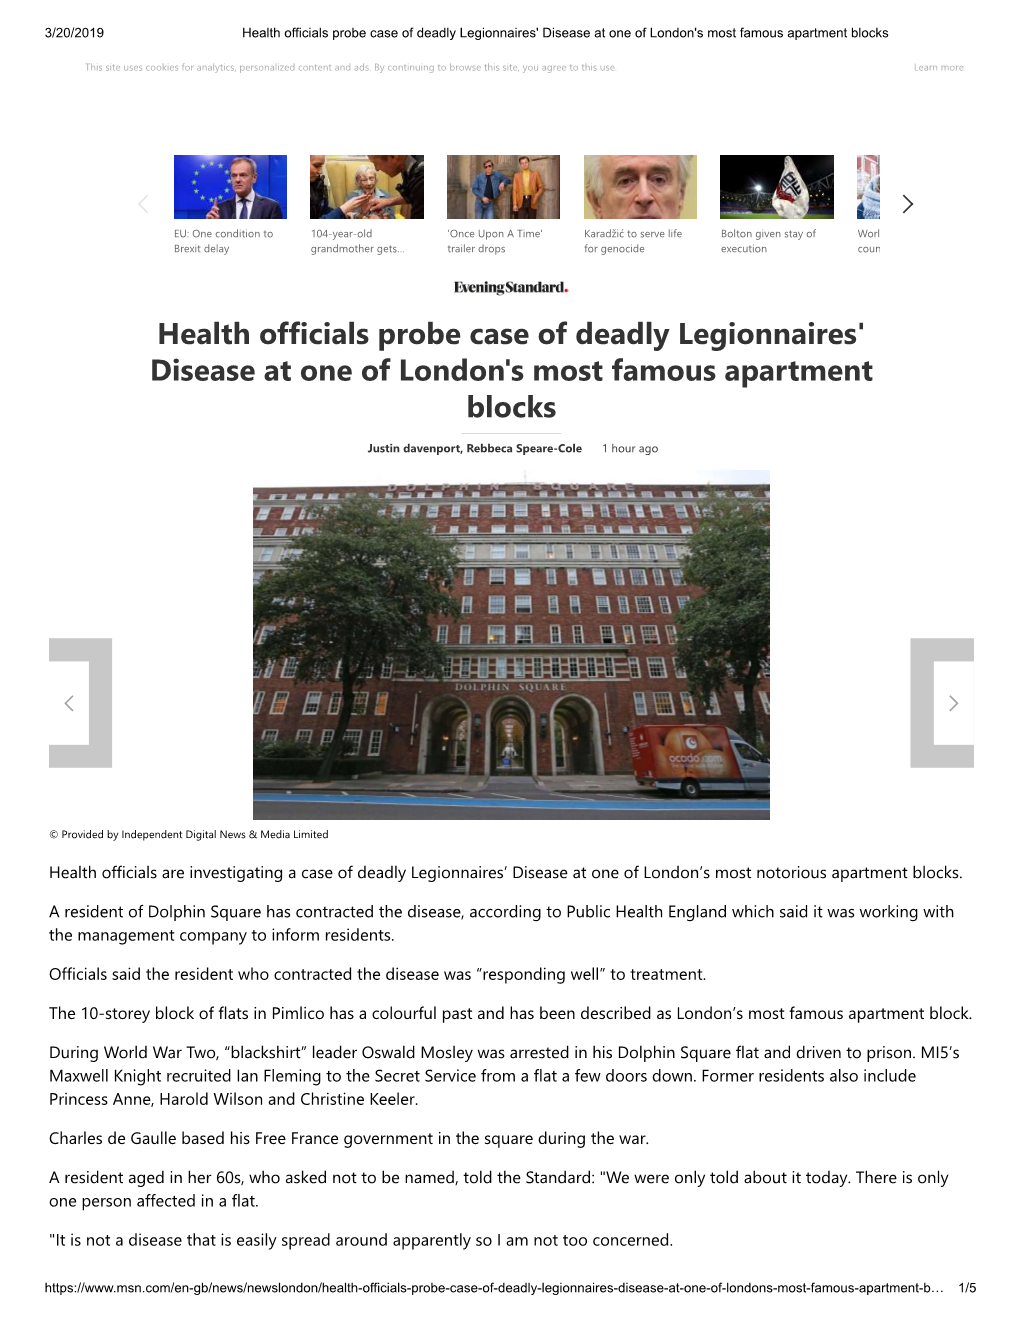 Dolphin Square Has Contracted the Disease, According to Public Health England Which Said It Was Working with the Management Company to Inform Residents